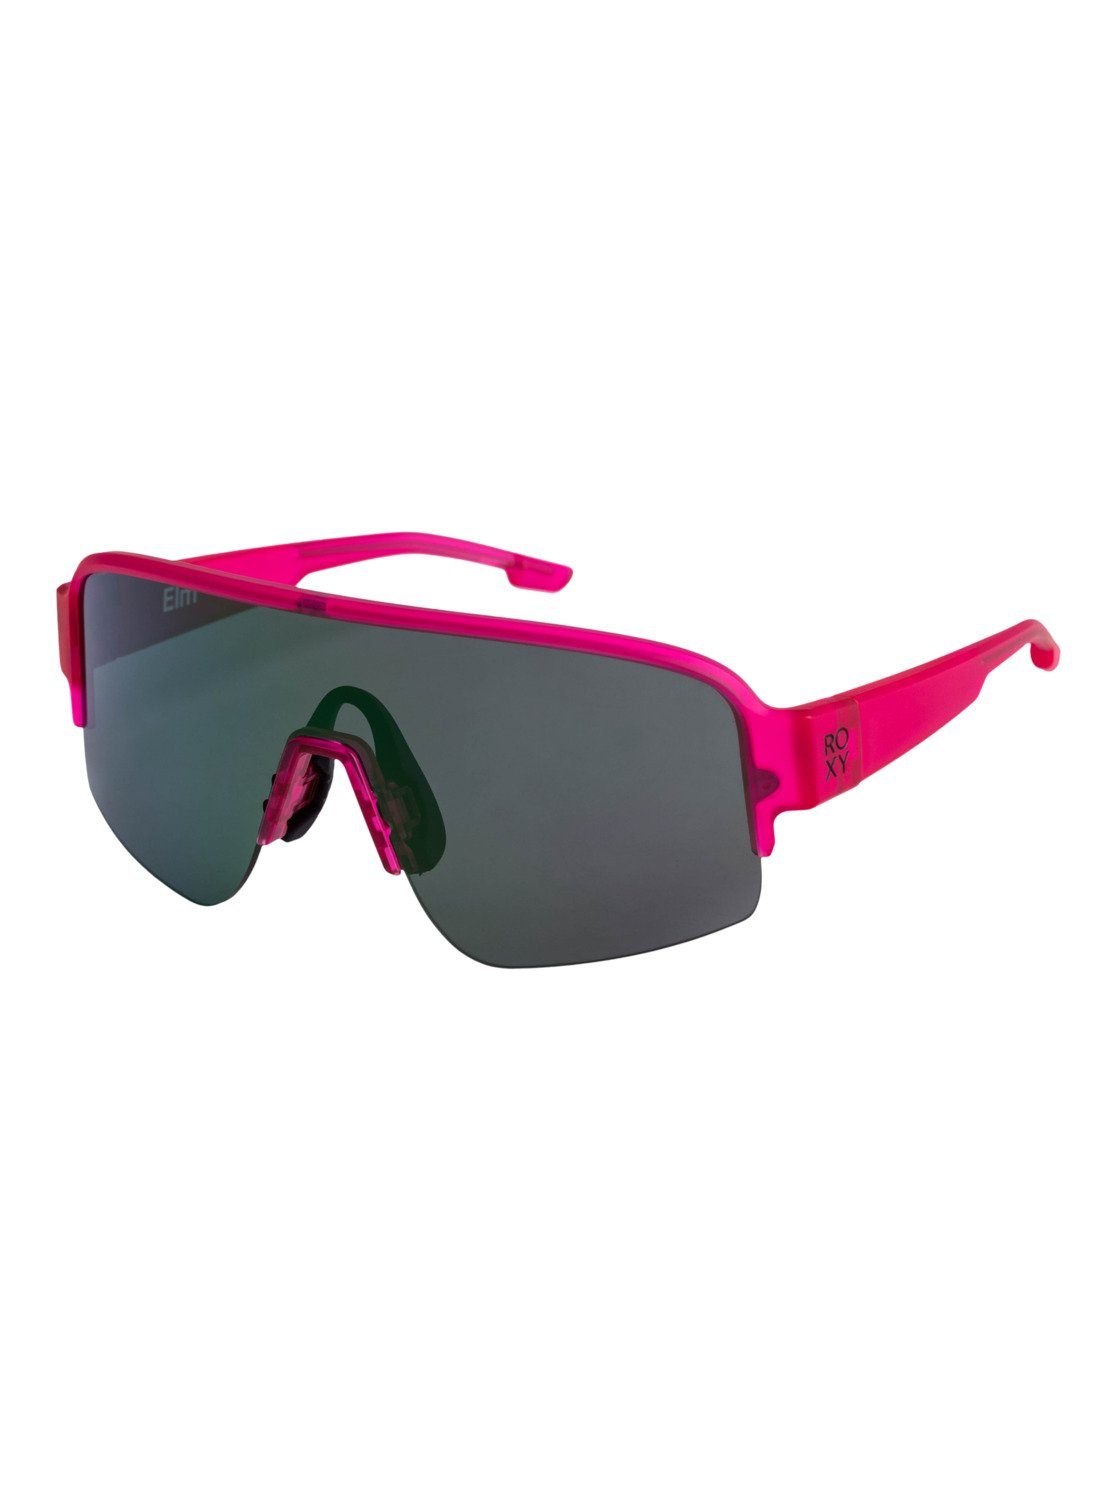 Roxy Sonnenbrille Elm Pink/Ml Turquoise